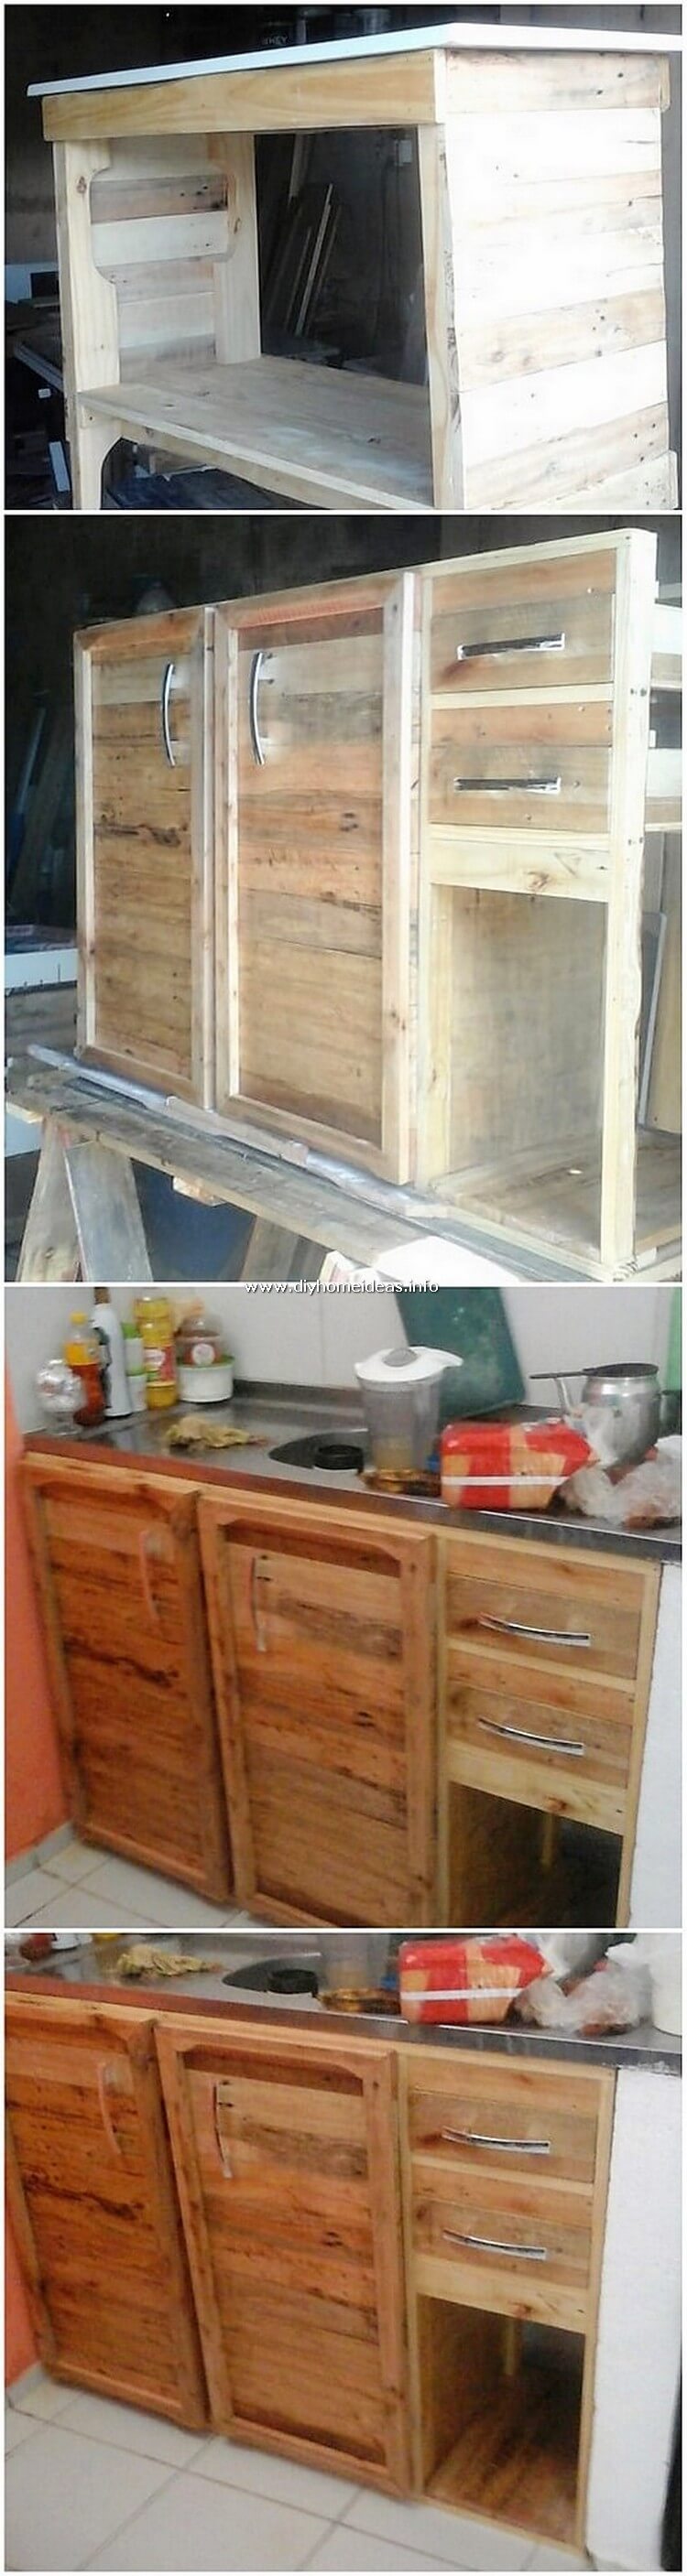 DIY Pallet Sink with Cabinet